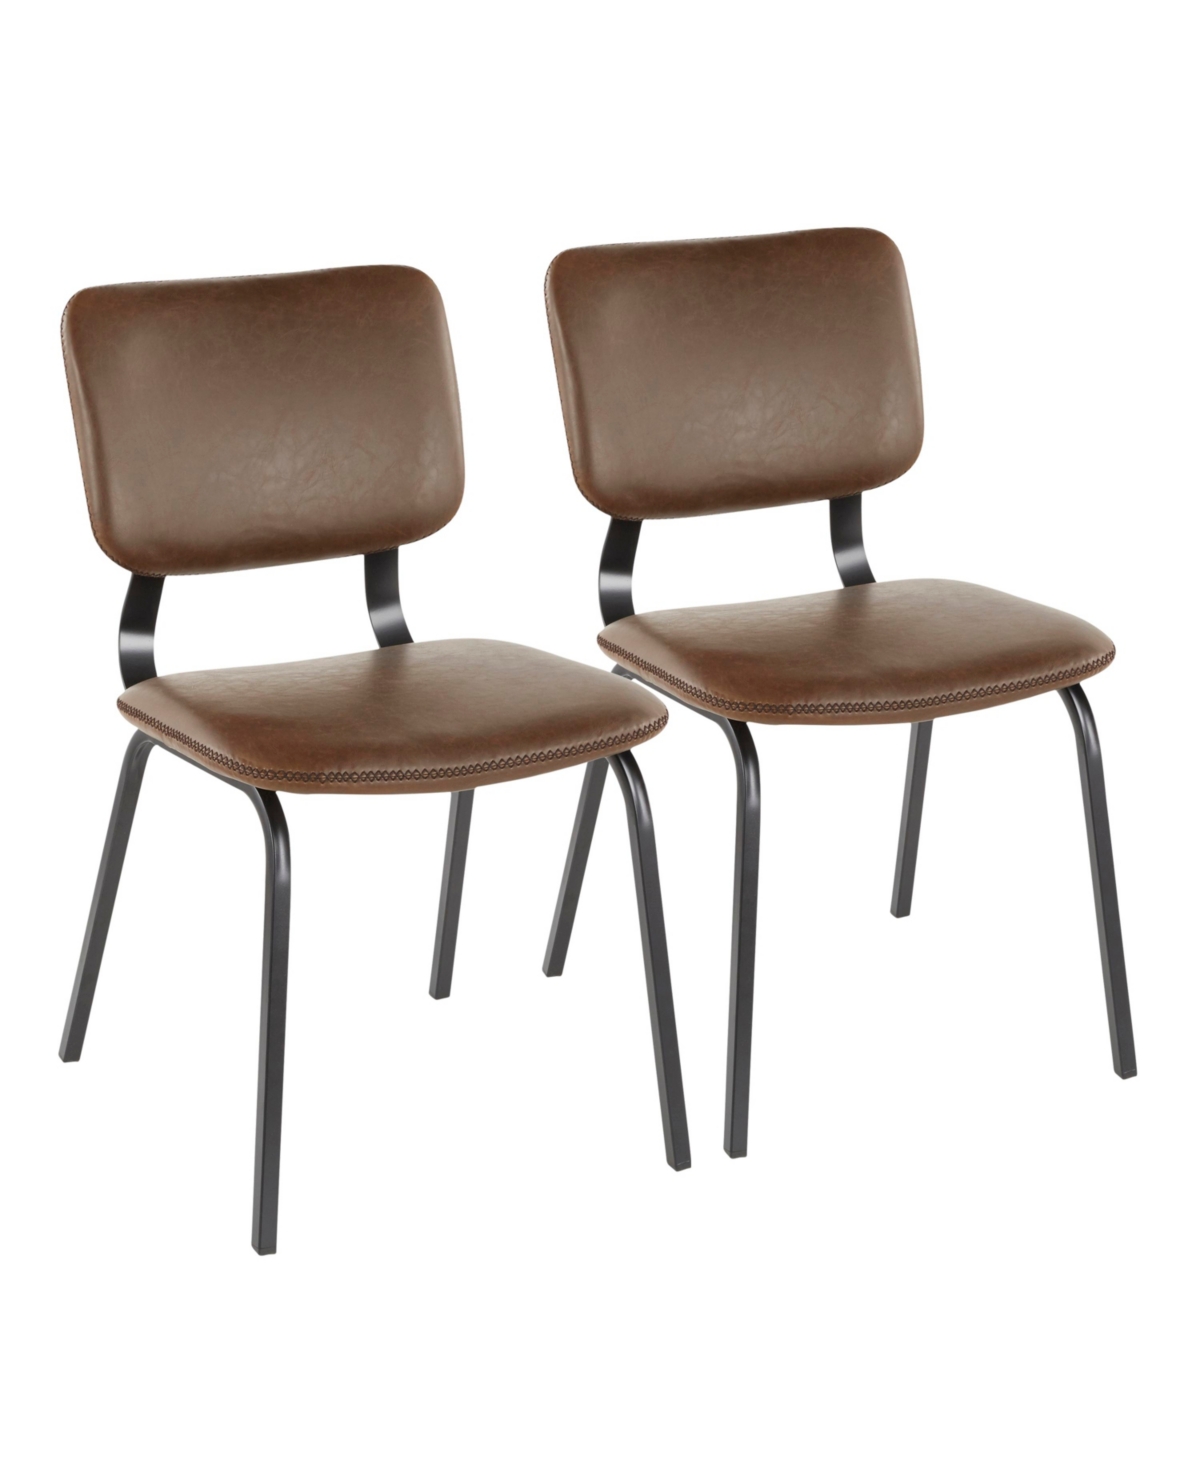 Foundry Dining Chairs, Set of 2